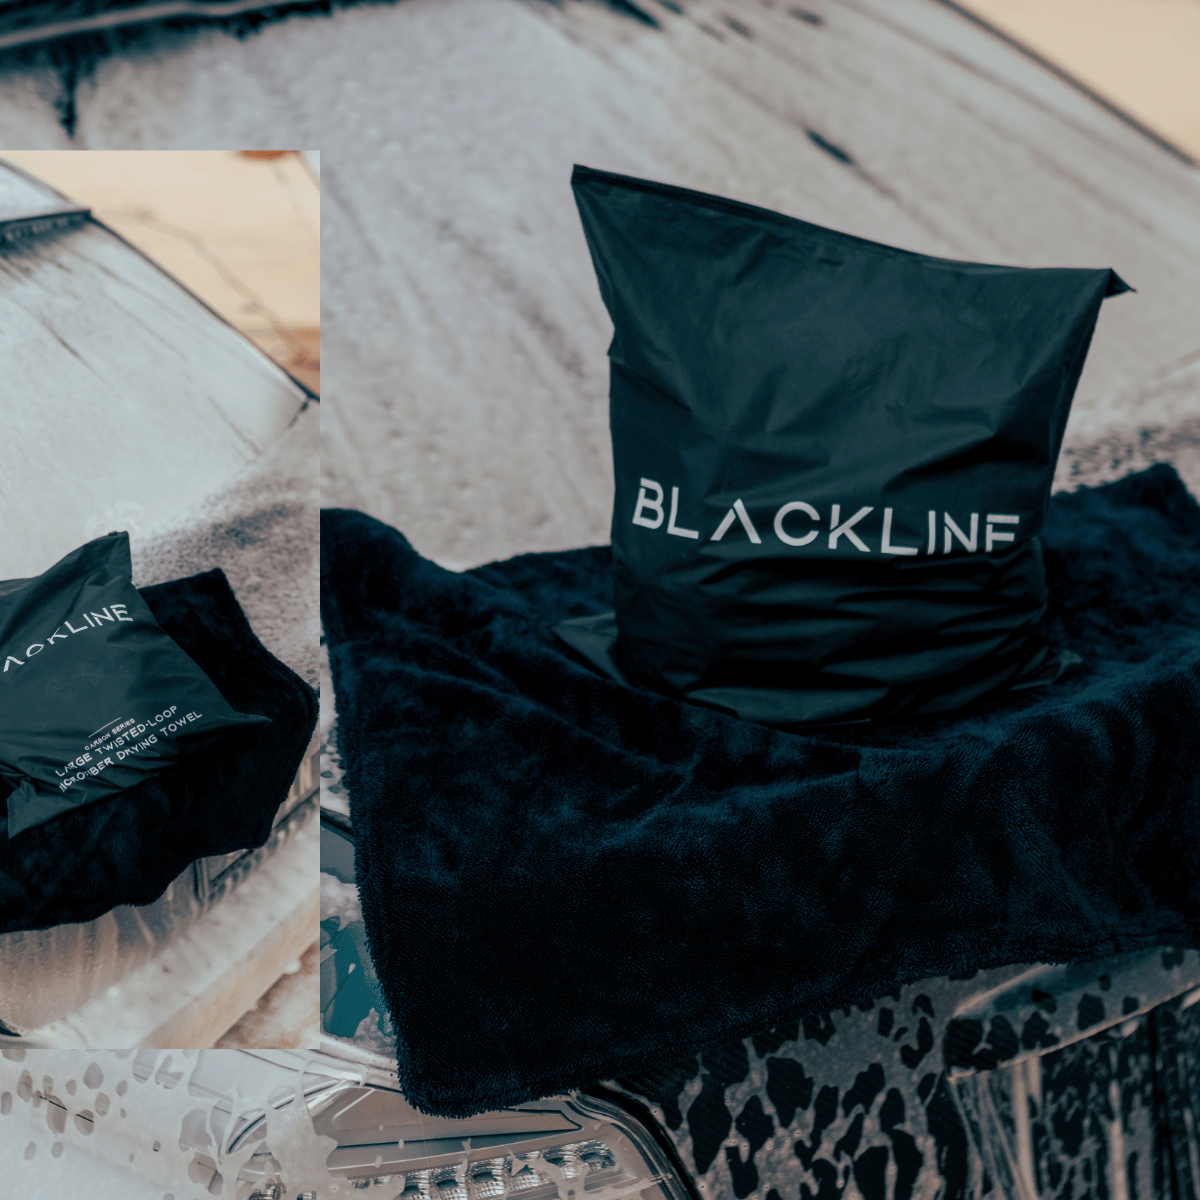 BLACKLINE on Instagram: Blackline Twisted Loop Drying Towel The Blackline  Drying Towel Uses A Twisted Loop Microfiber Weave To Be One Of The Most  Absorbant Towels On The Market. Having A Twisted